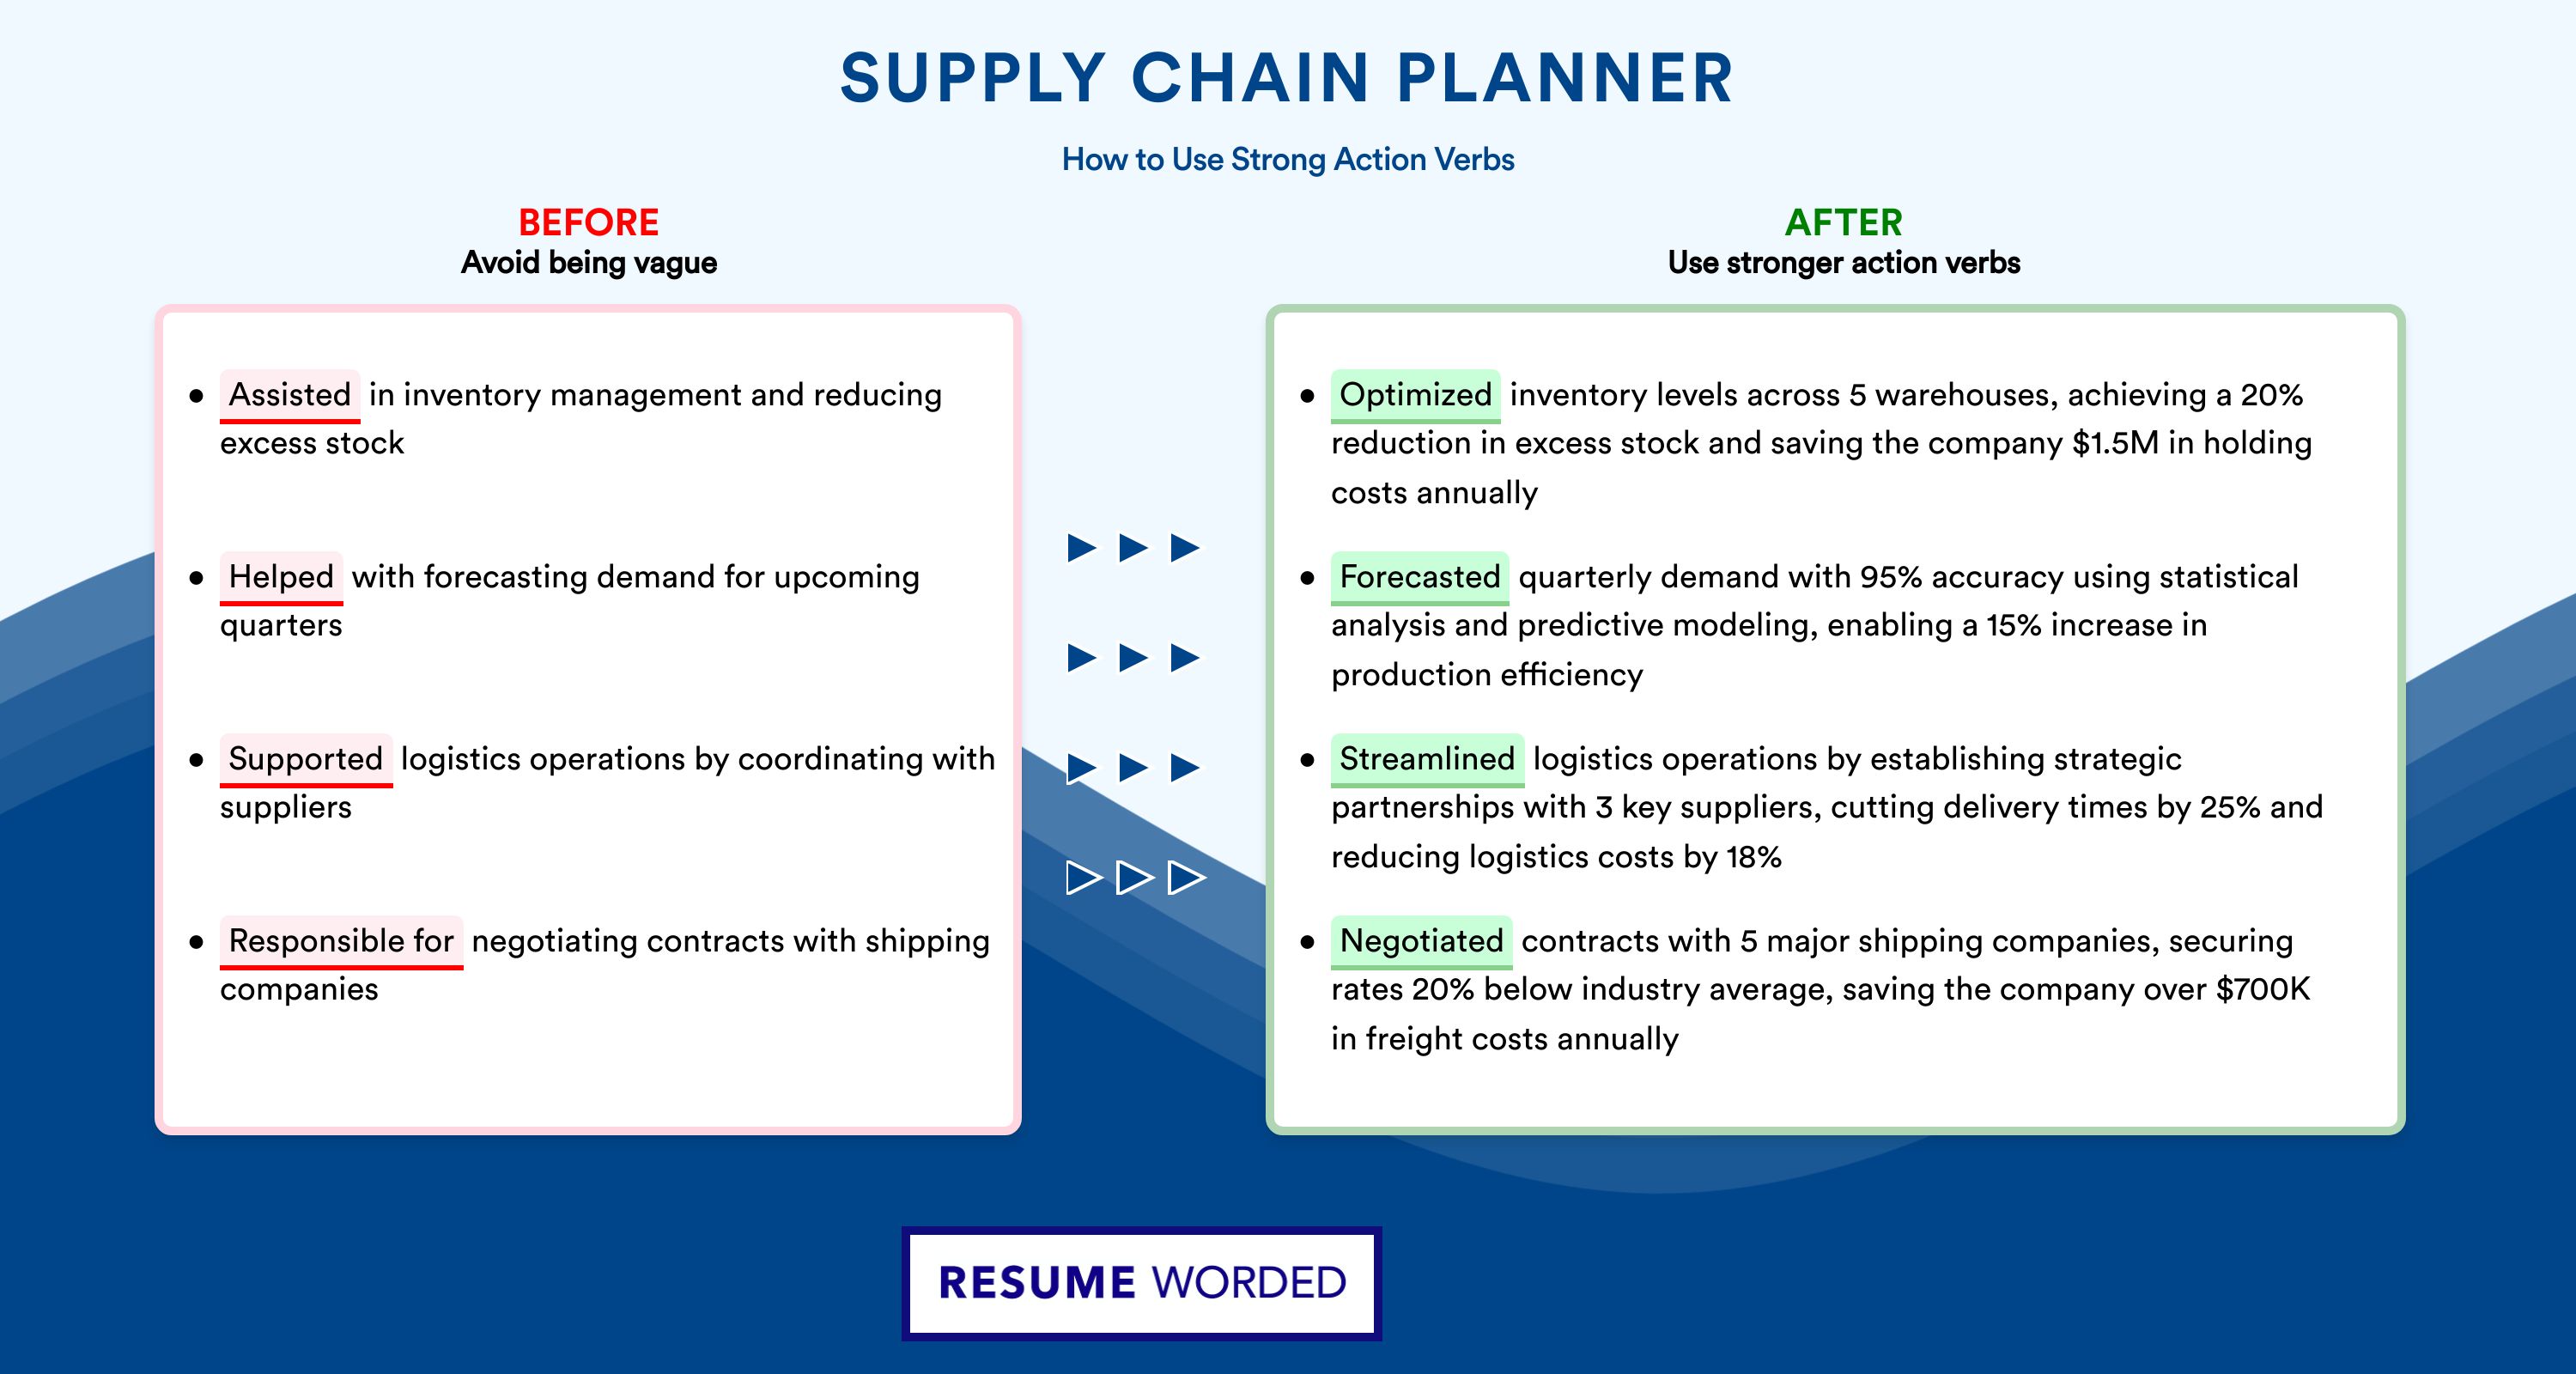 Action Verbs for Supply Chain Planner